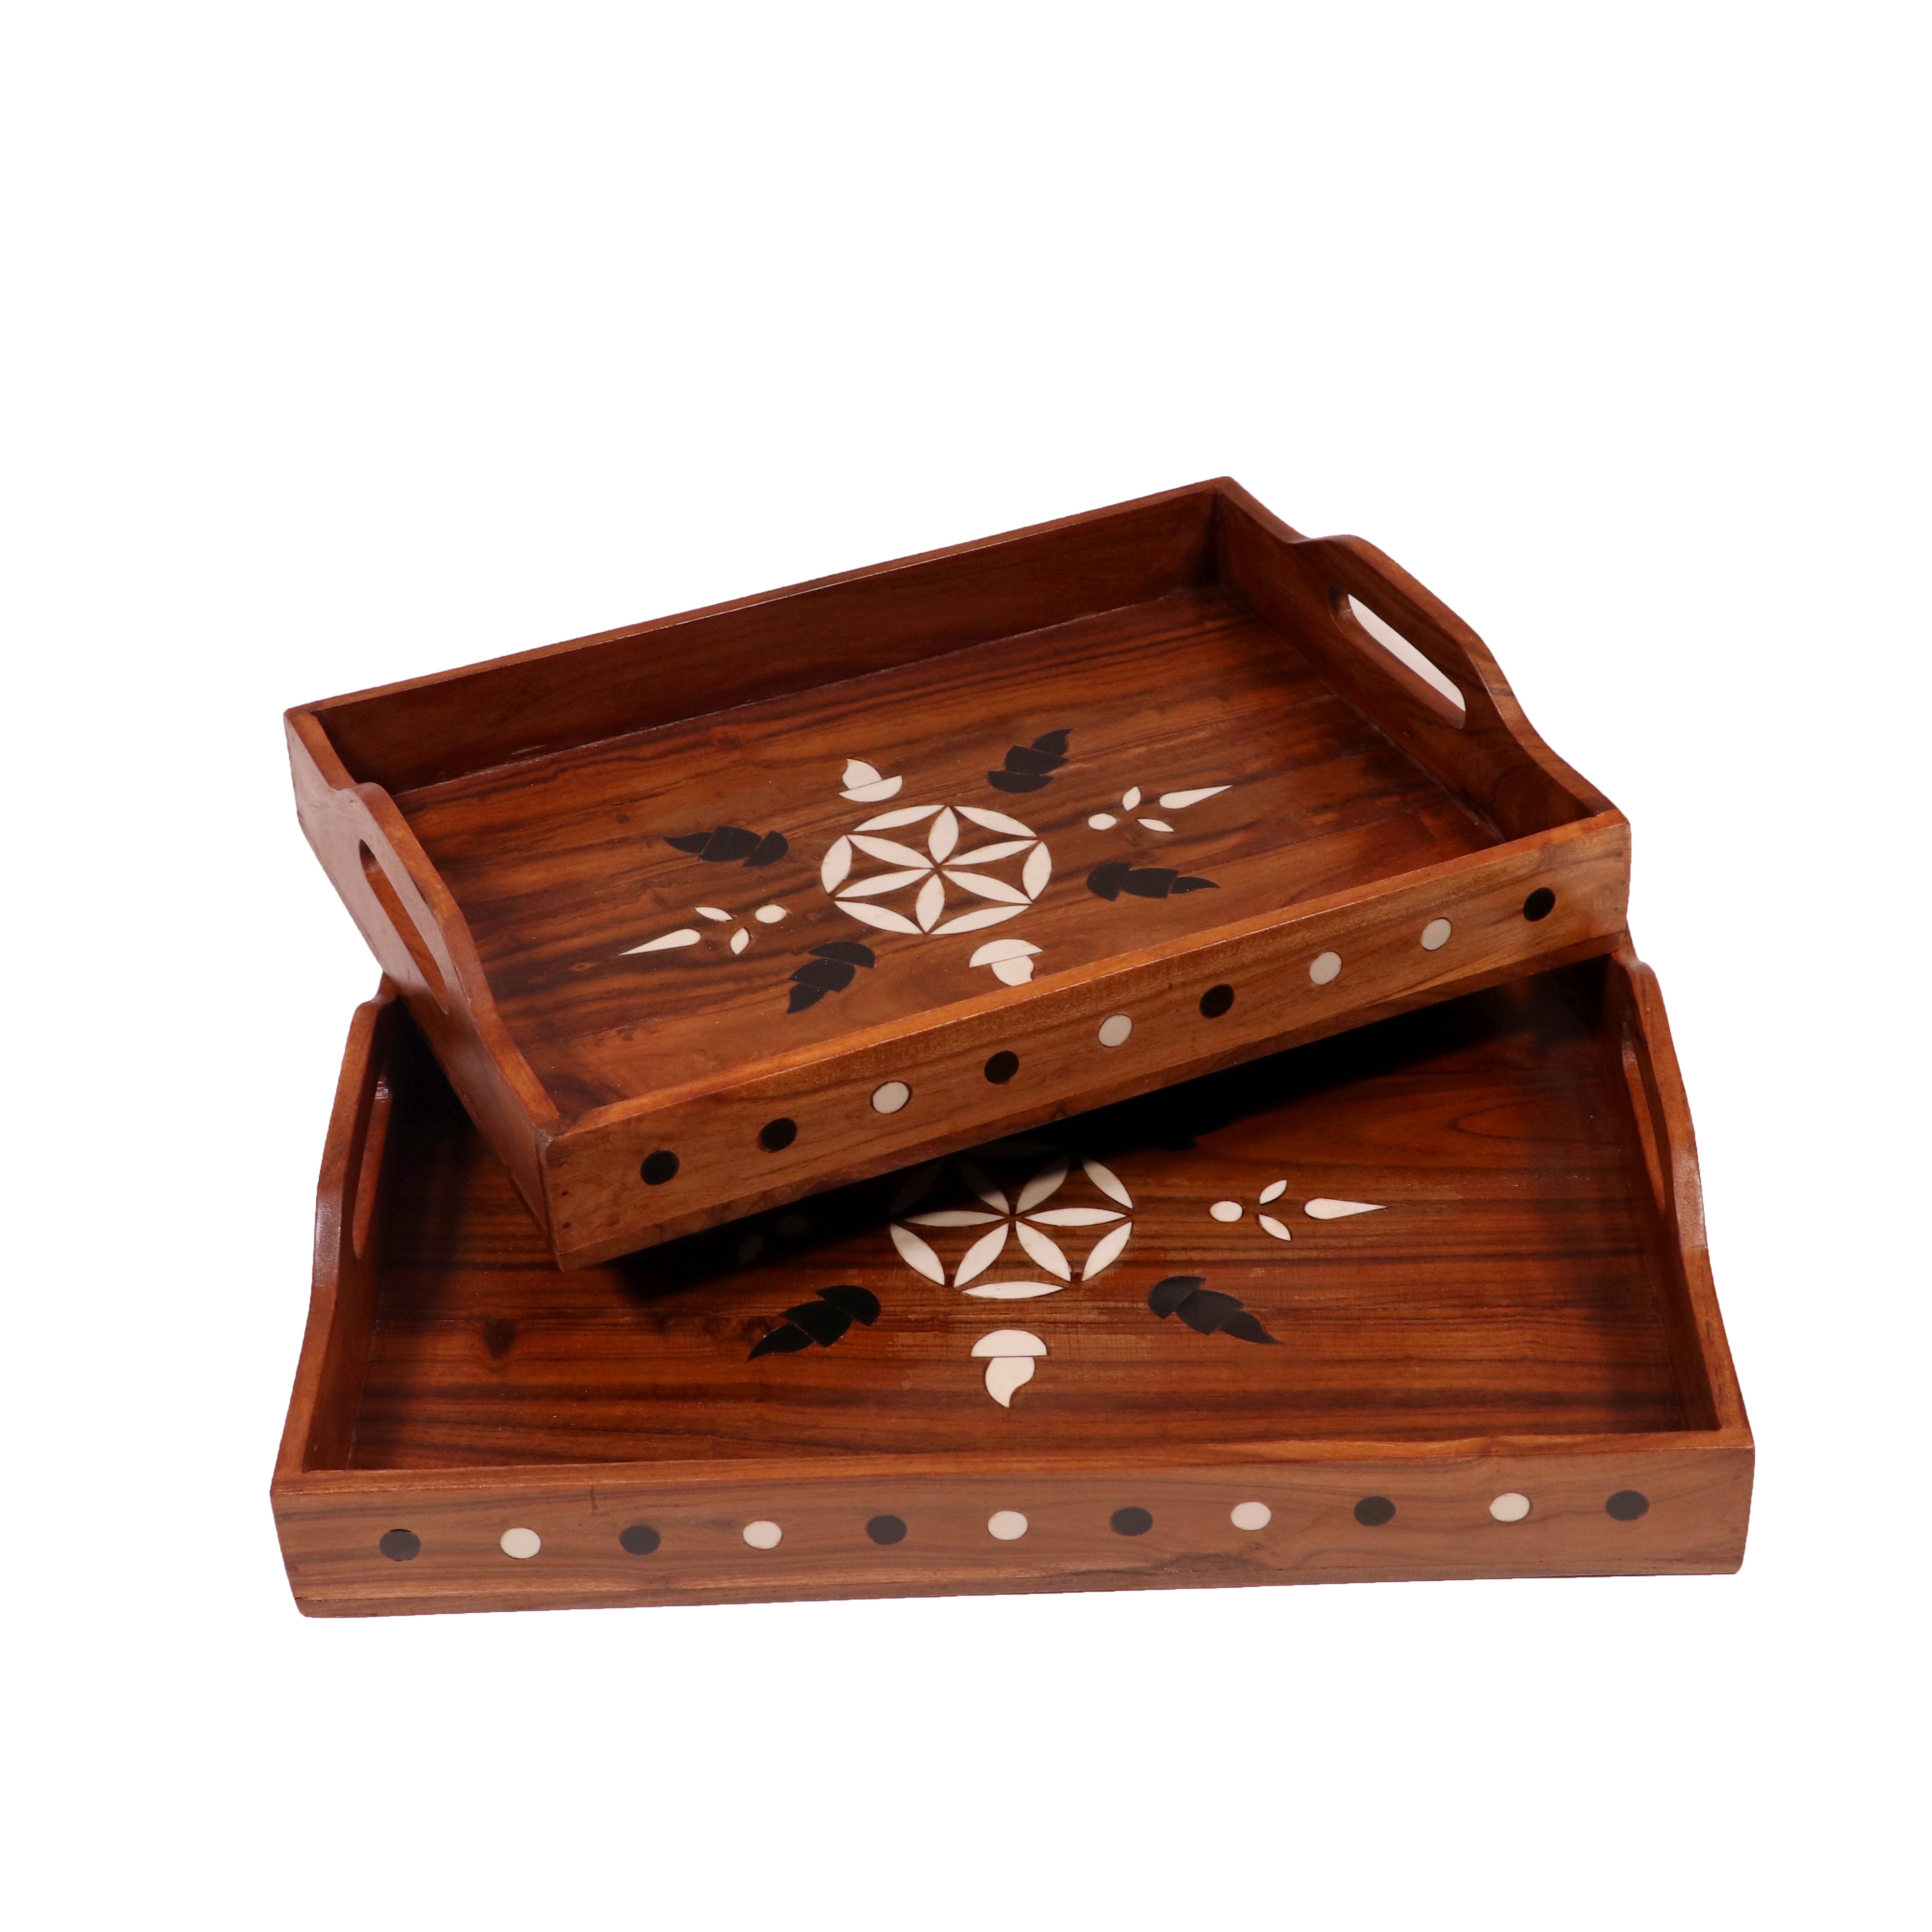 Fusion Flower Inlay Designed Wooden Handmade Tray - Set of 2 Tray